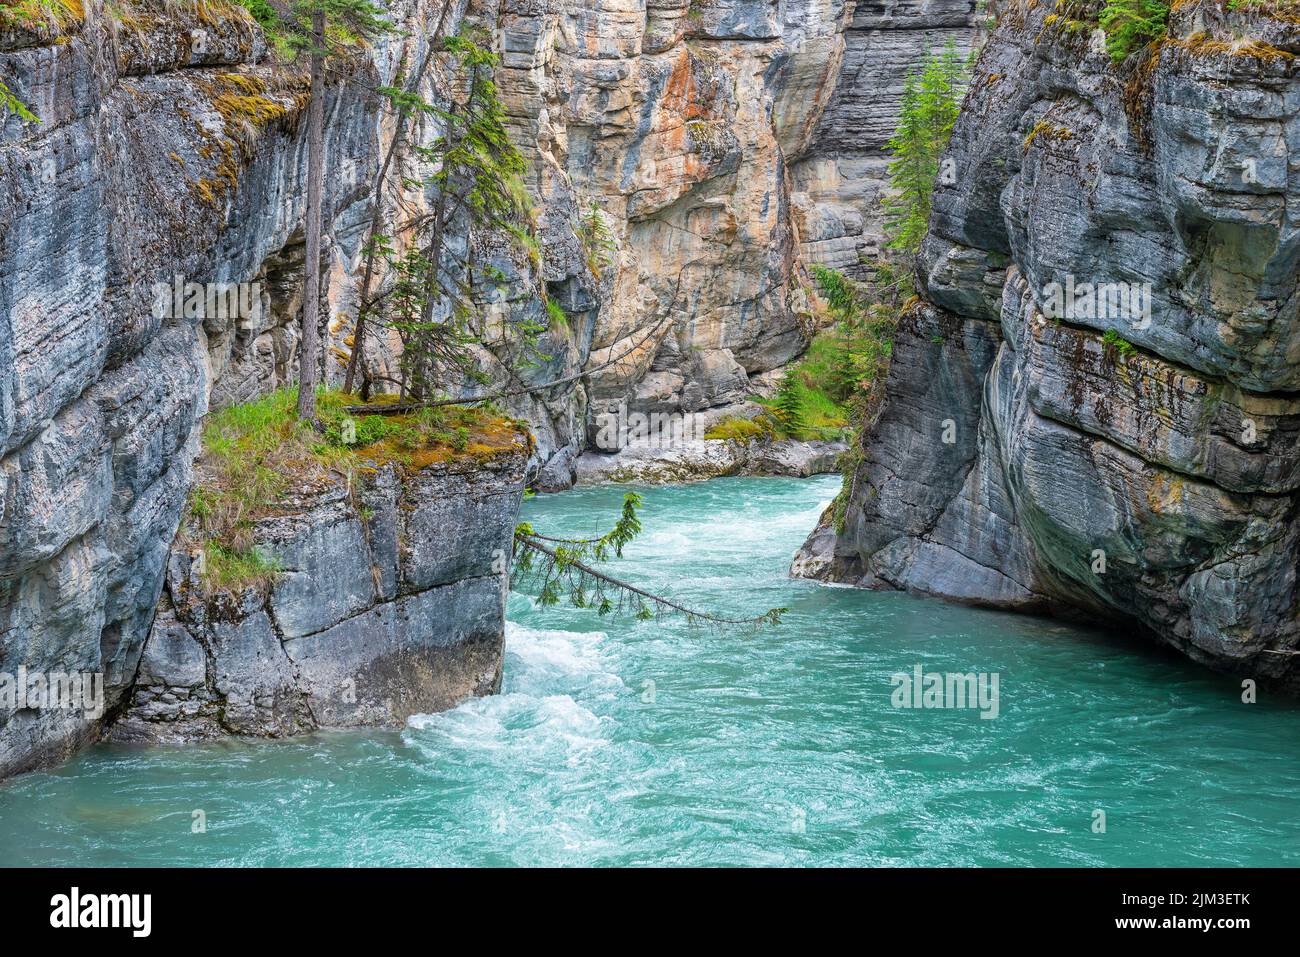 Maligne river with turquoise waters in the Maligne Canyon, Jasper national park, Alberta, Canada. Stock Photo